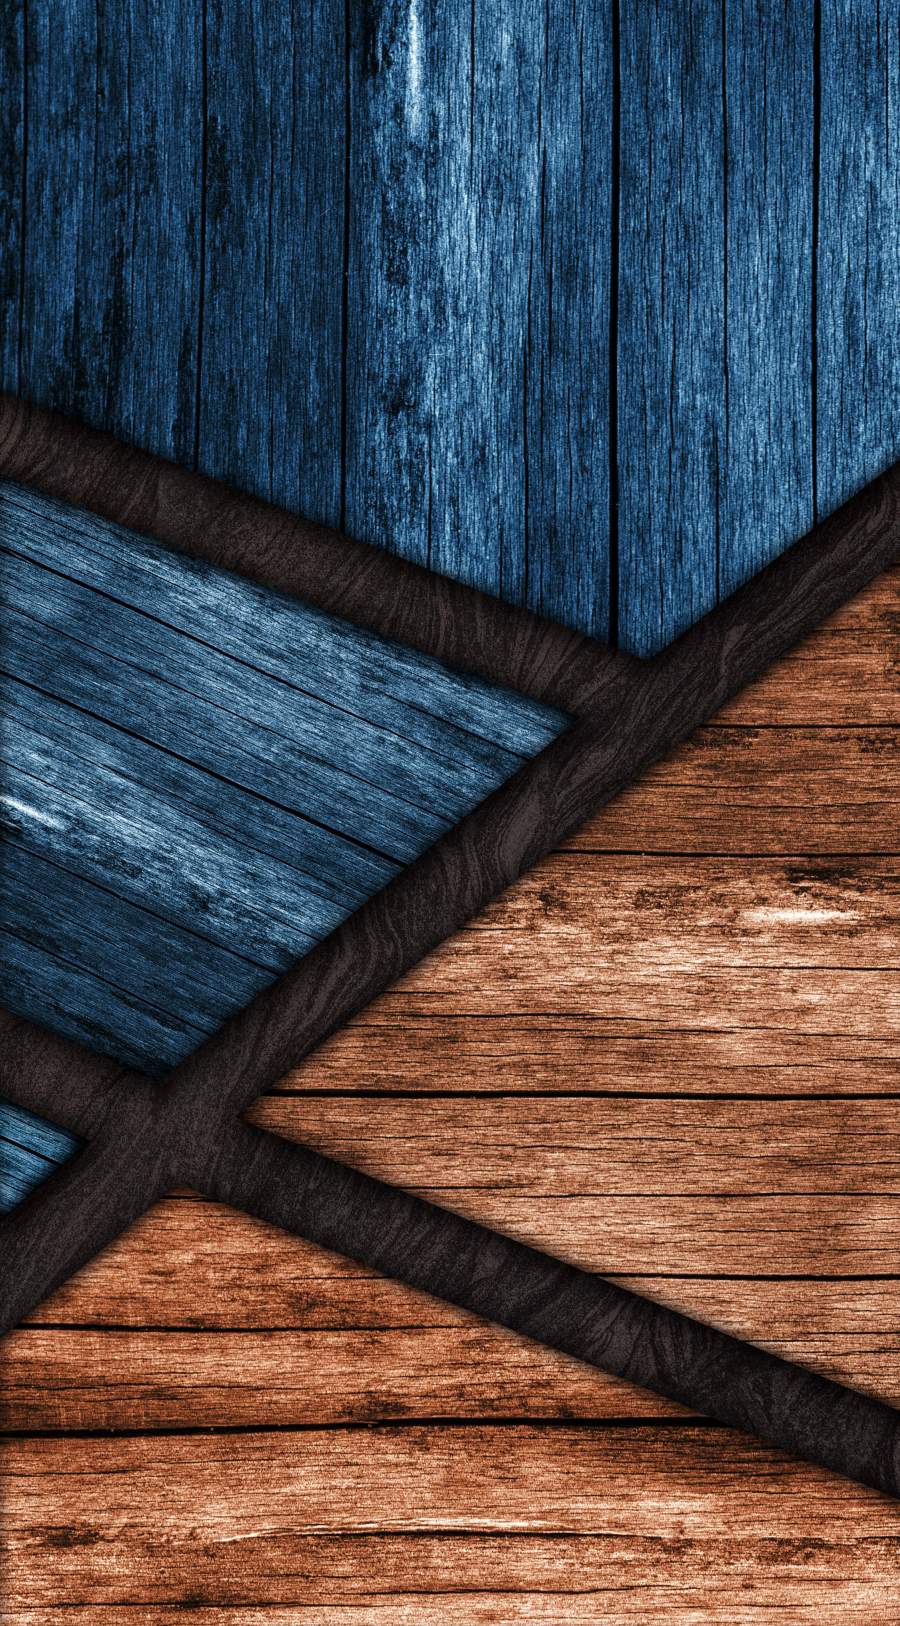 Wood iPhone Wallpapers  Wallpaper Cave